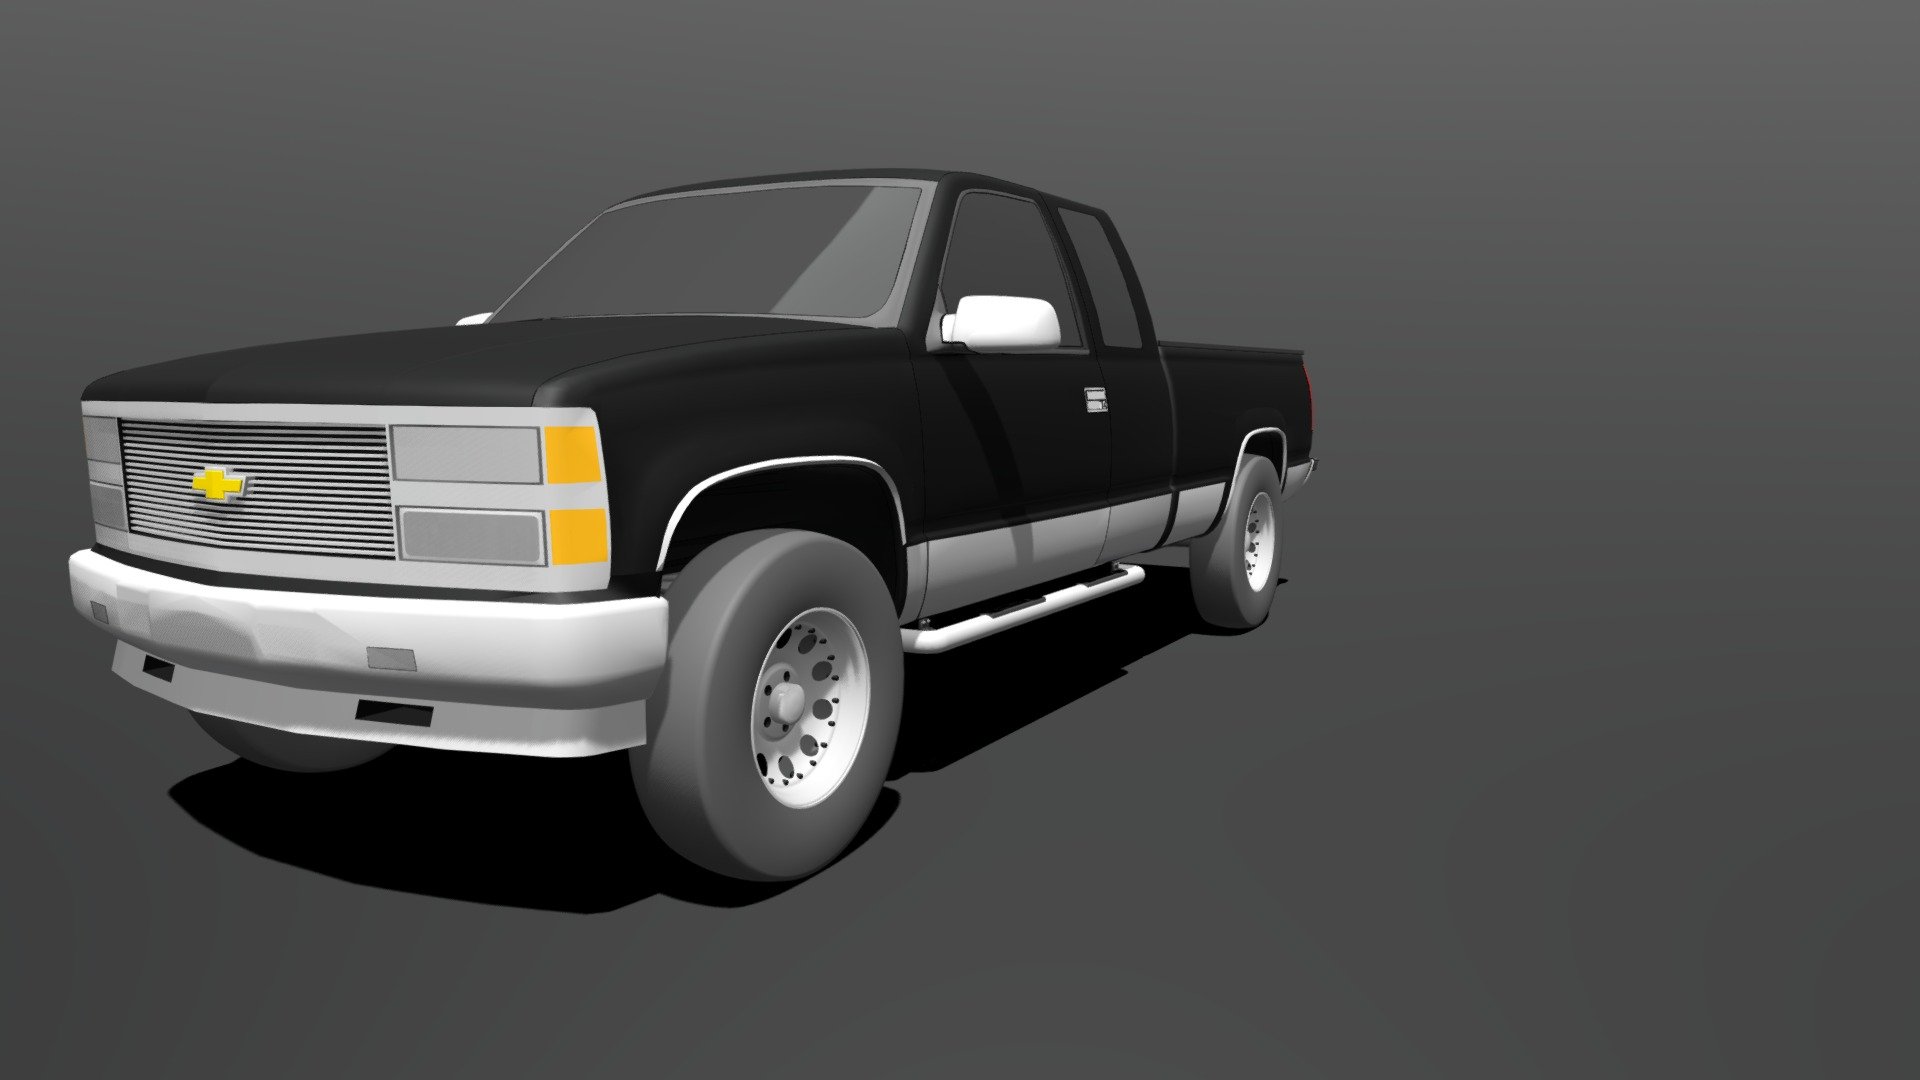 A nice truck with game 3d model